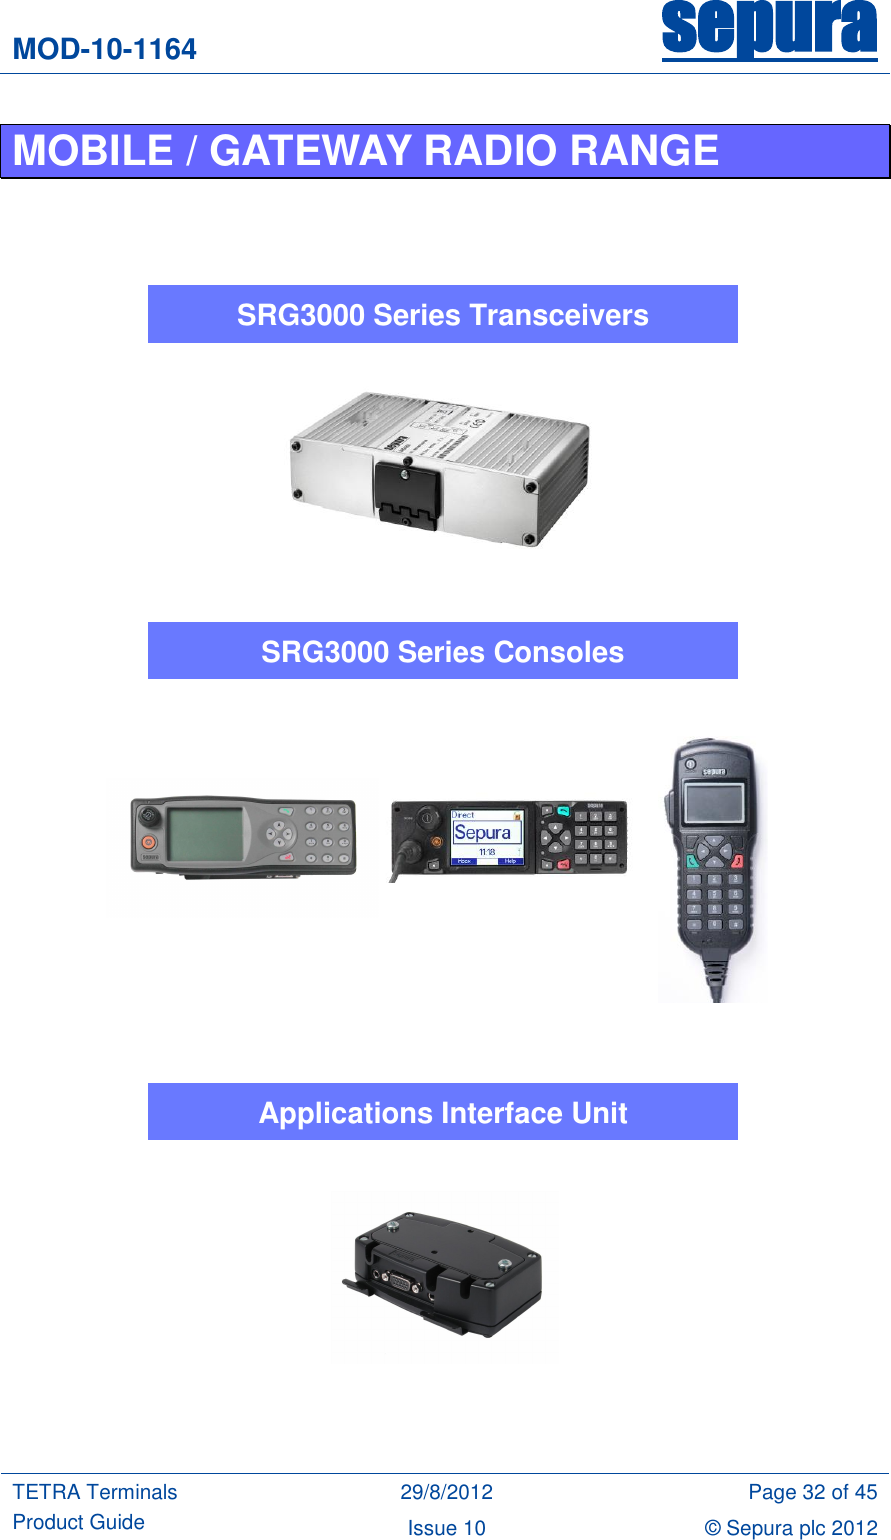 MOD-10-1164 sepura  TETRA Terminals Product Guide 29/8/2012 Page 32 of 45 Issue 10 © Sepura plc 2012   MOBILE / GATEWAY RADIO RANGE                                 SRG3000 Series Transceivers Applications Interface Unit SRG3000 Series Consoles 